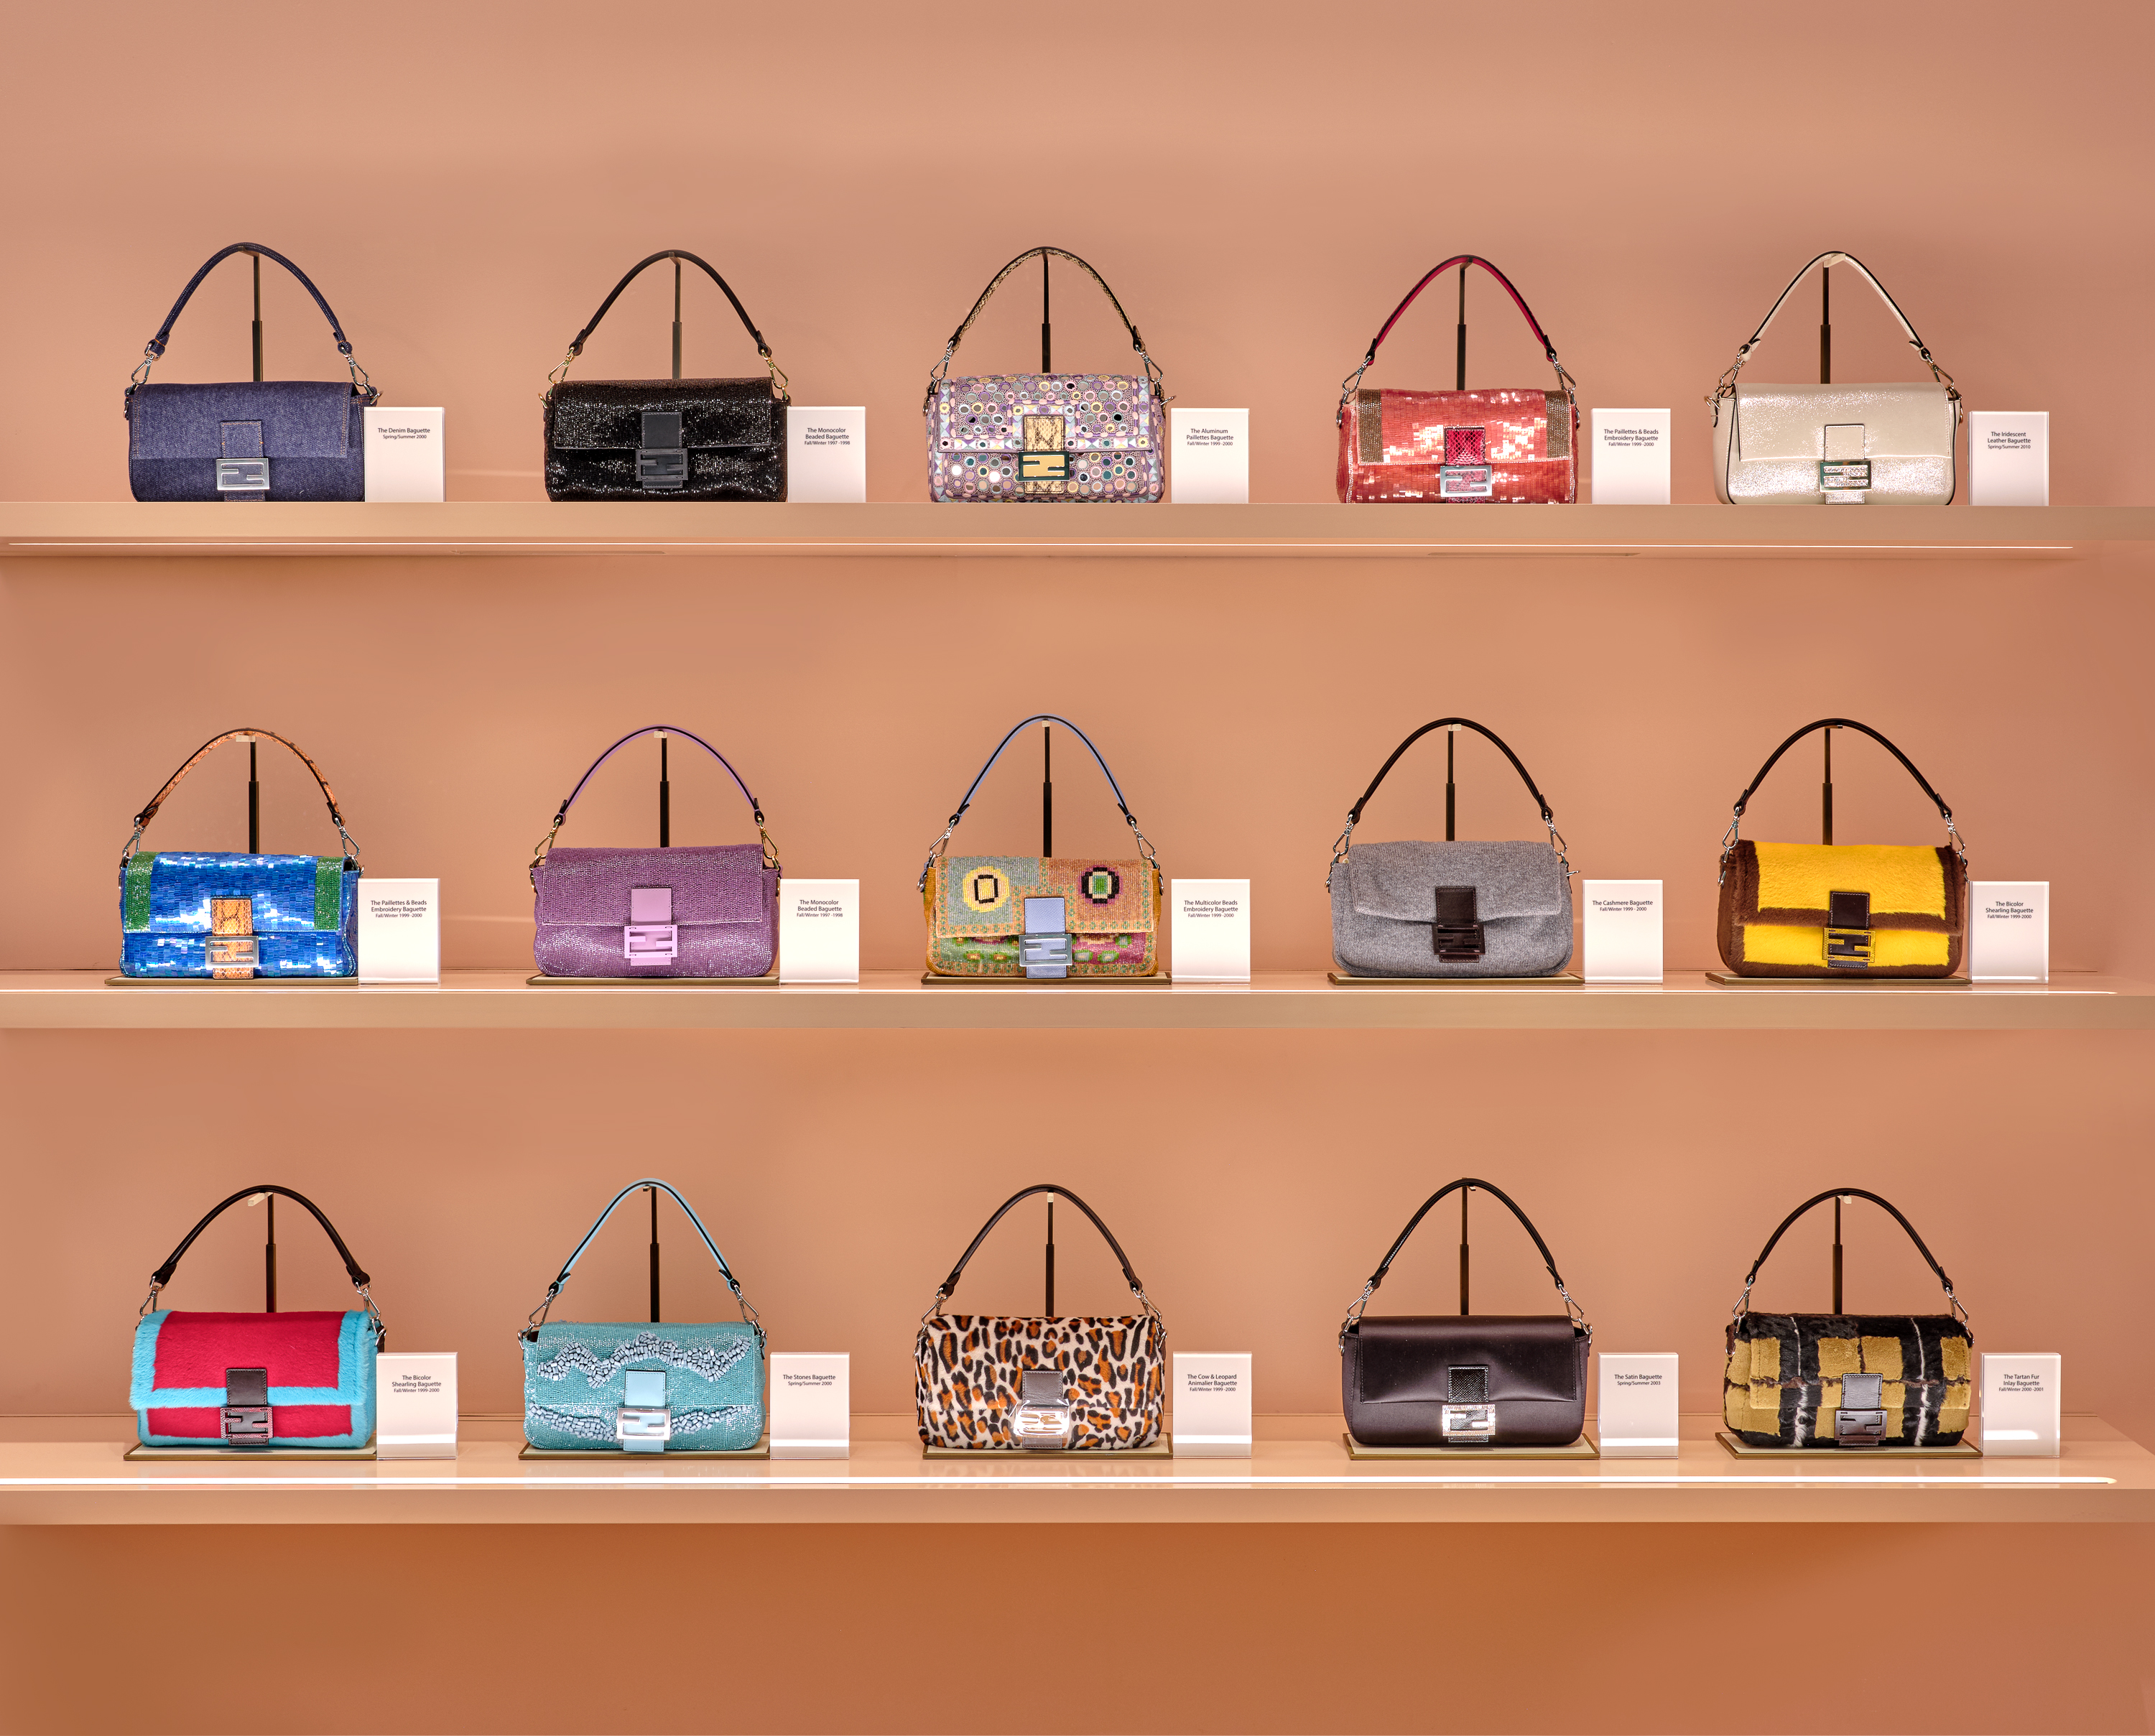 Fendi Opens NYC Pop-Up For the 25th Anniversary of the Baguette